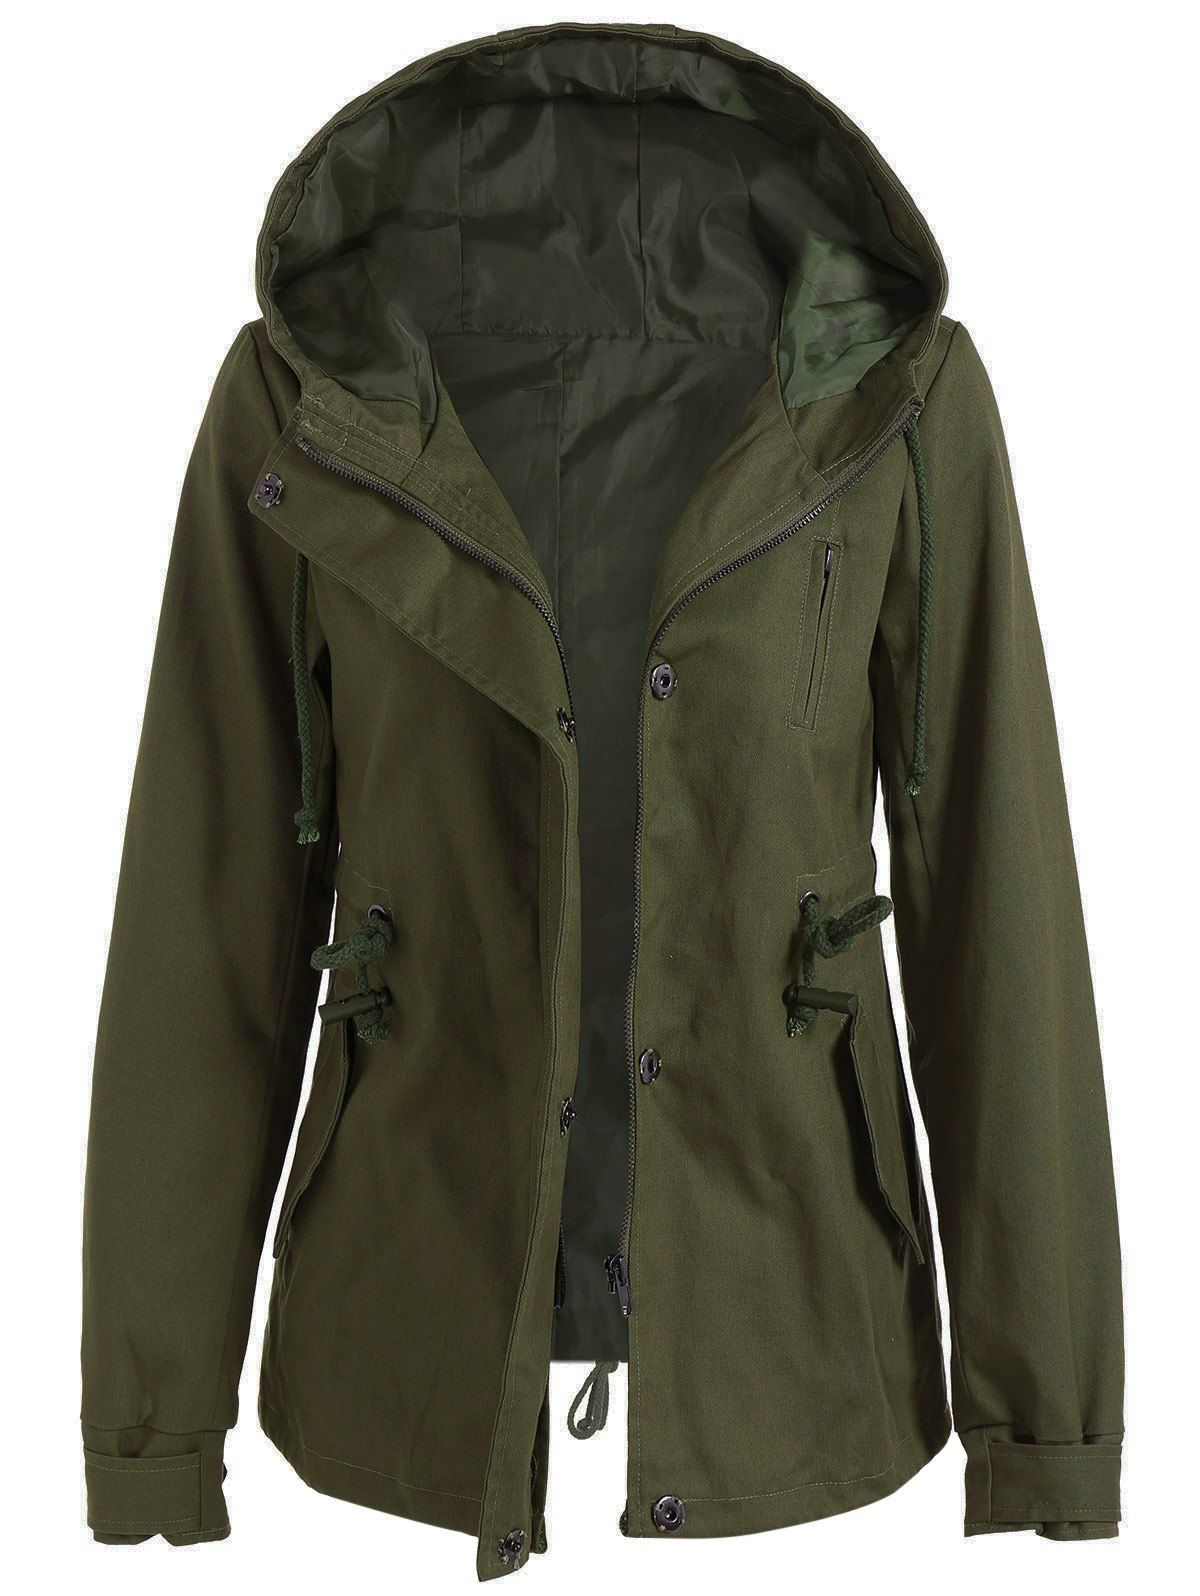 [17% OFF] 2021 Drawstring Cargo Jacket With Hood In ARMY GREEN | DressLily